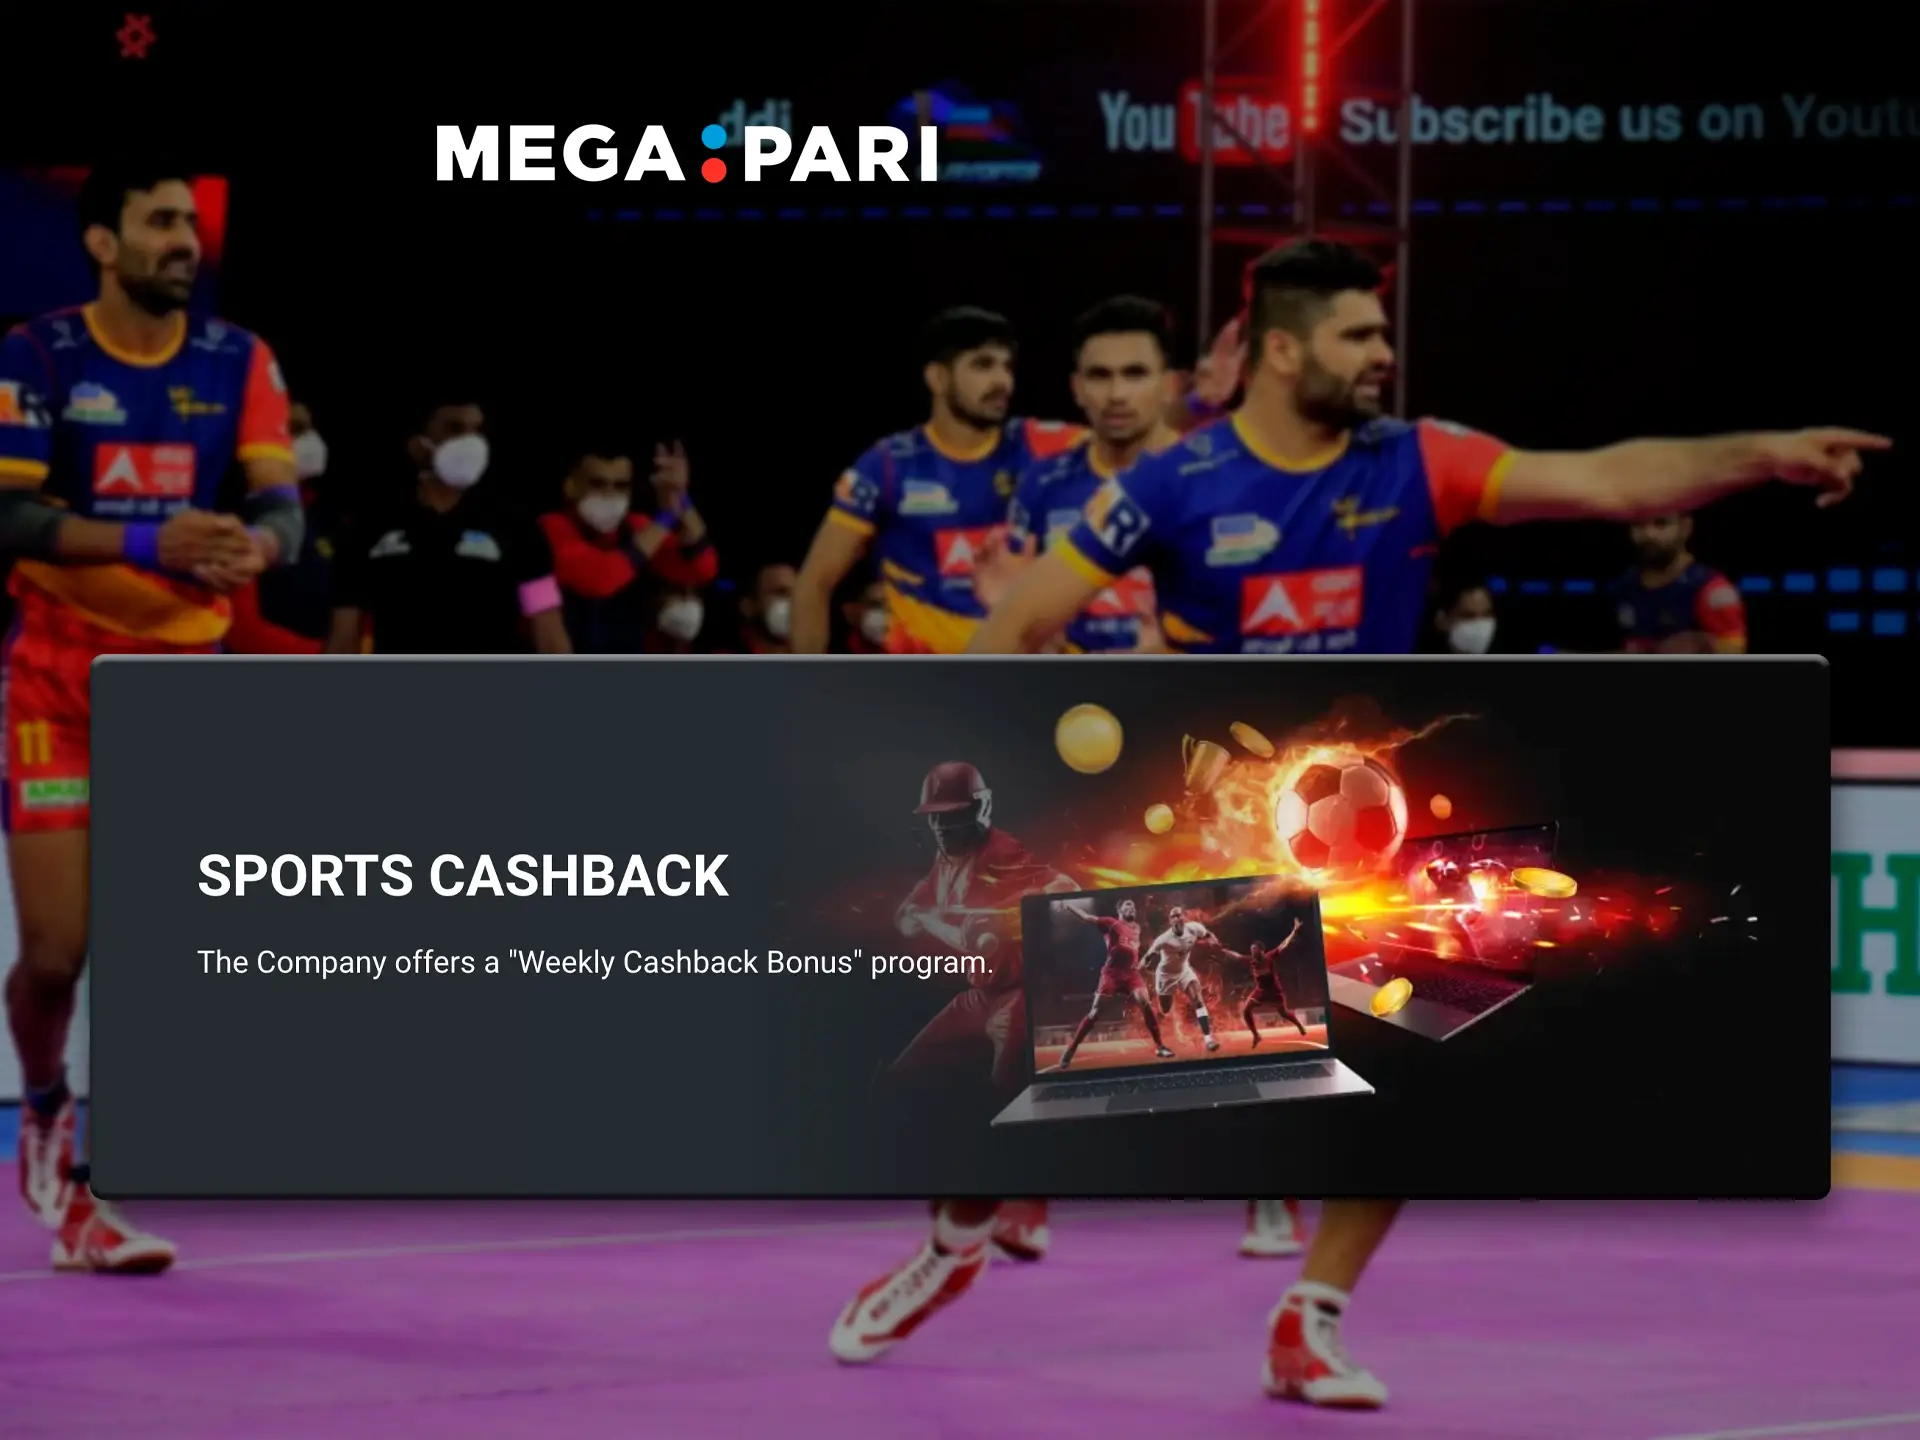 Immediately after registering with Melbet you get a large bonus to bet on Kabaddi.